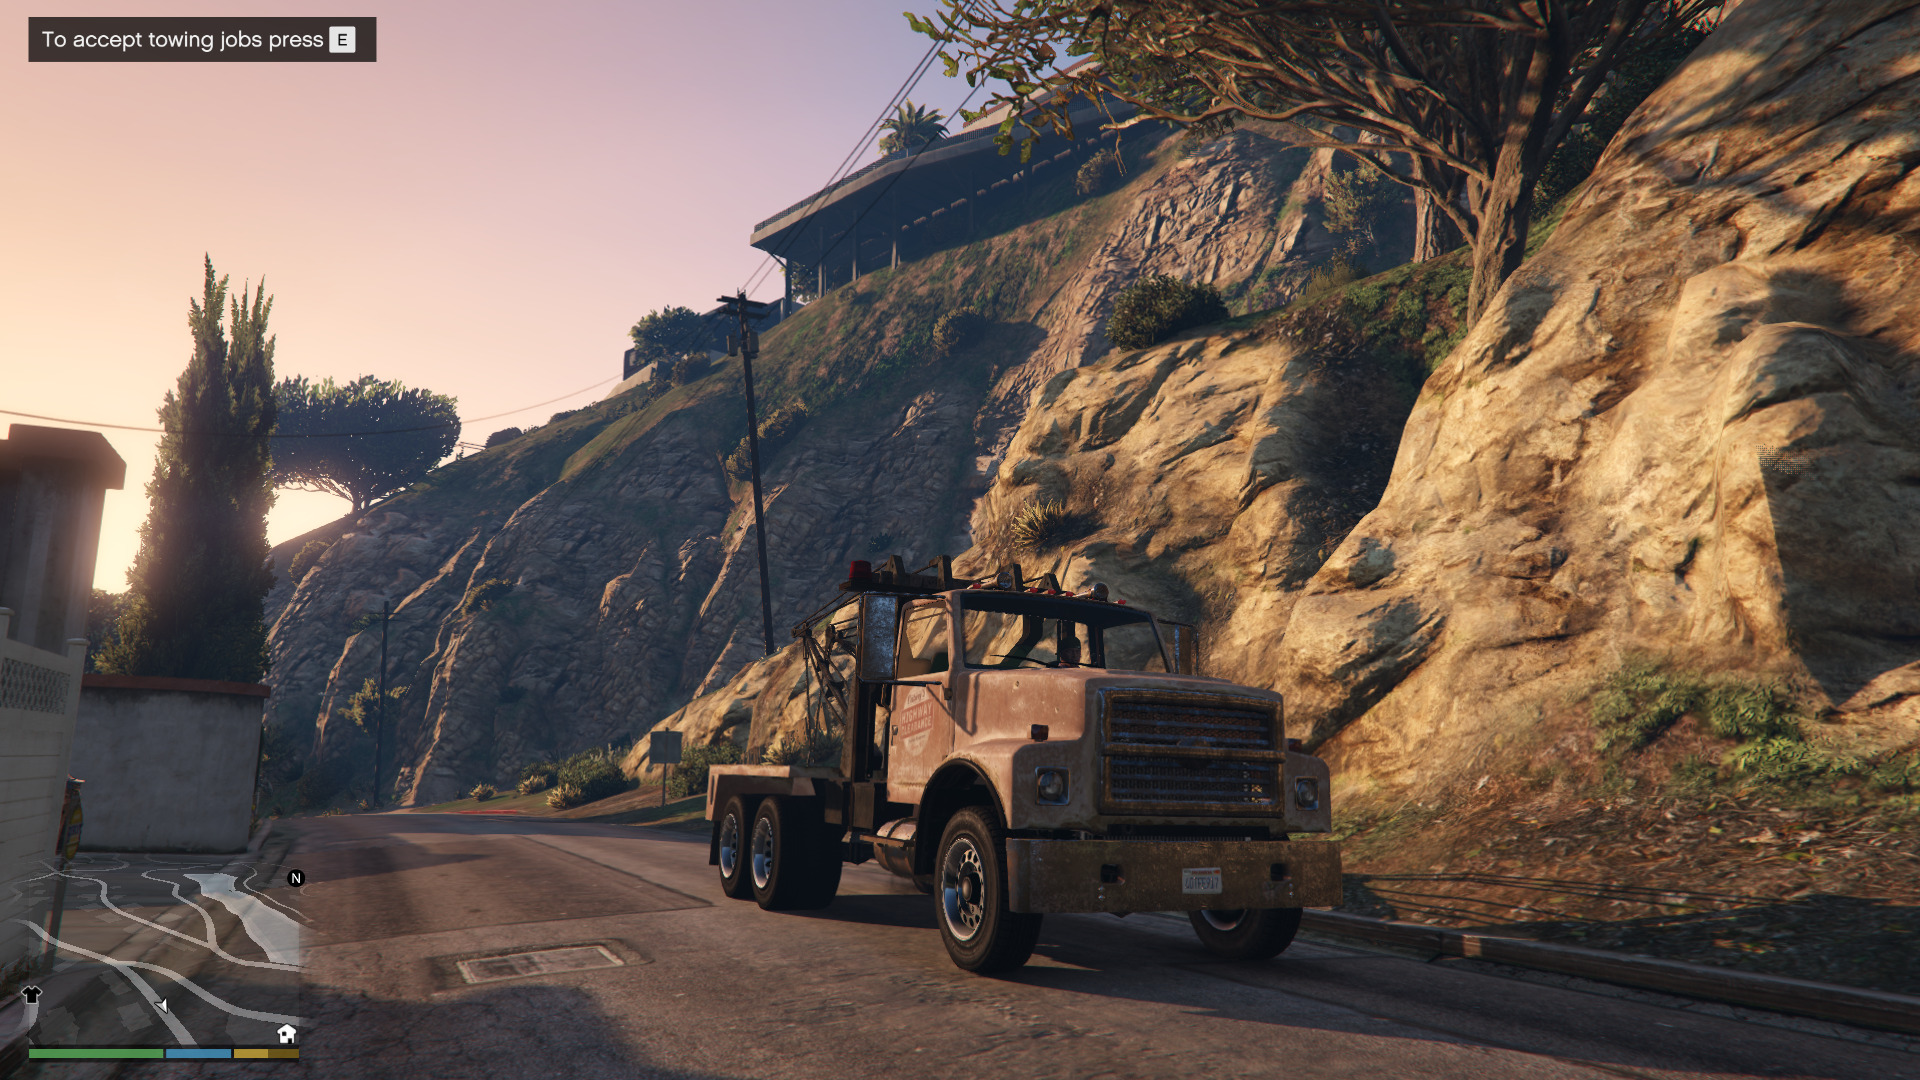 Install the appropriate Tow Truck mods to call a tow truck in GTA 5